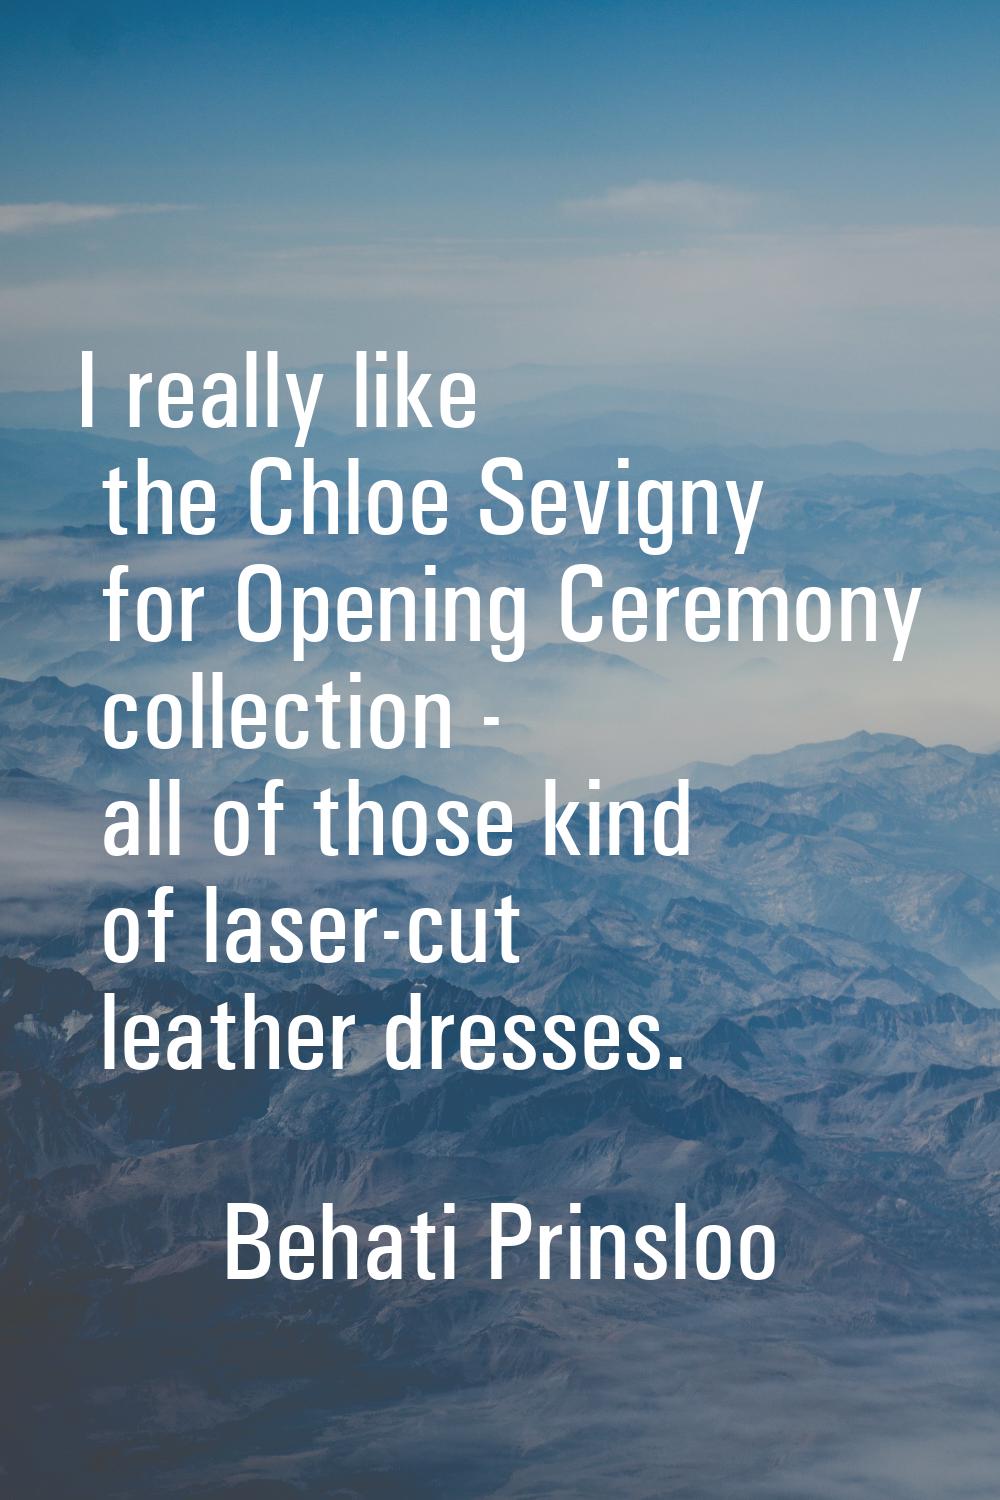 I really like the Chloe Sevigny for Opening Ceremony collection - all of those kind of laser-cut le